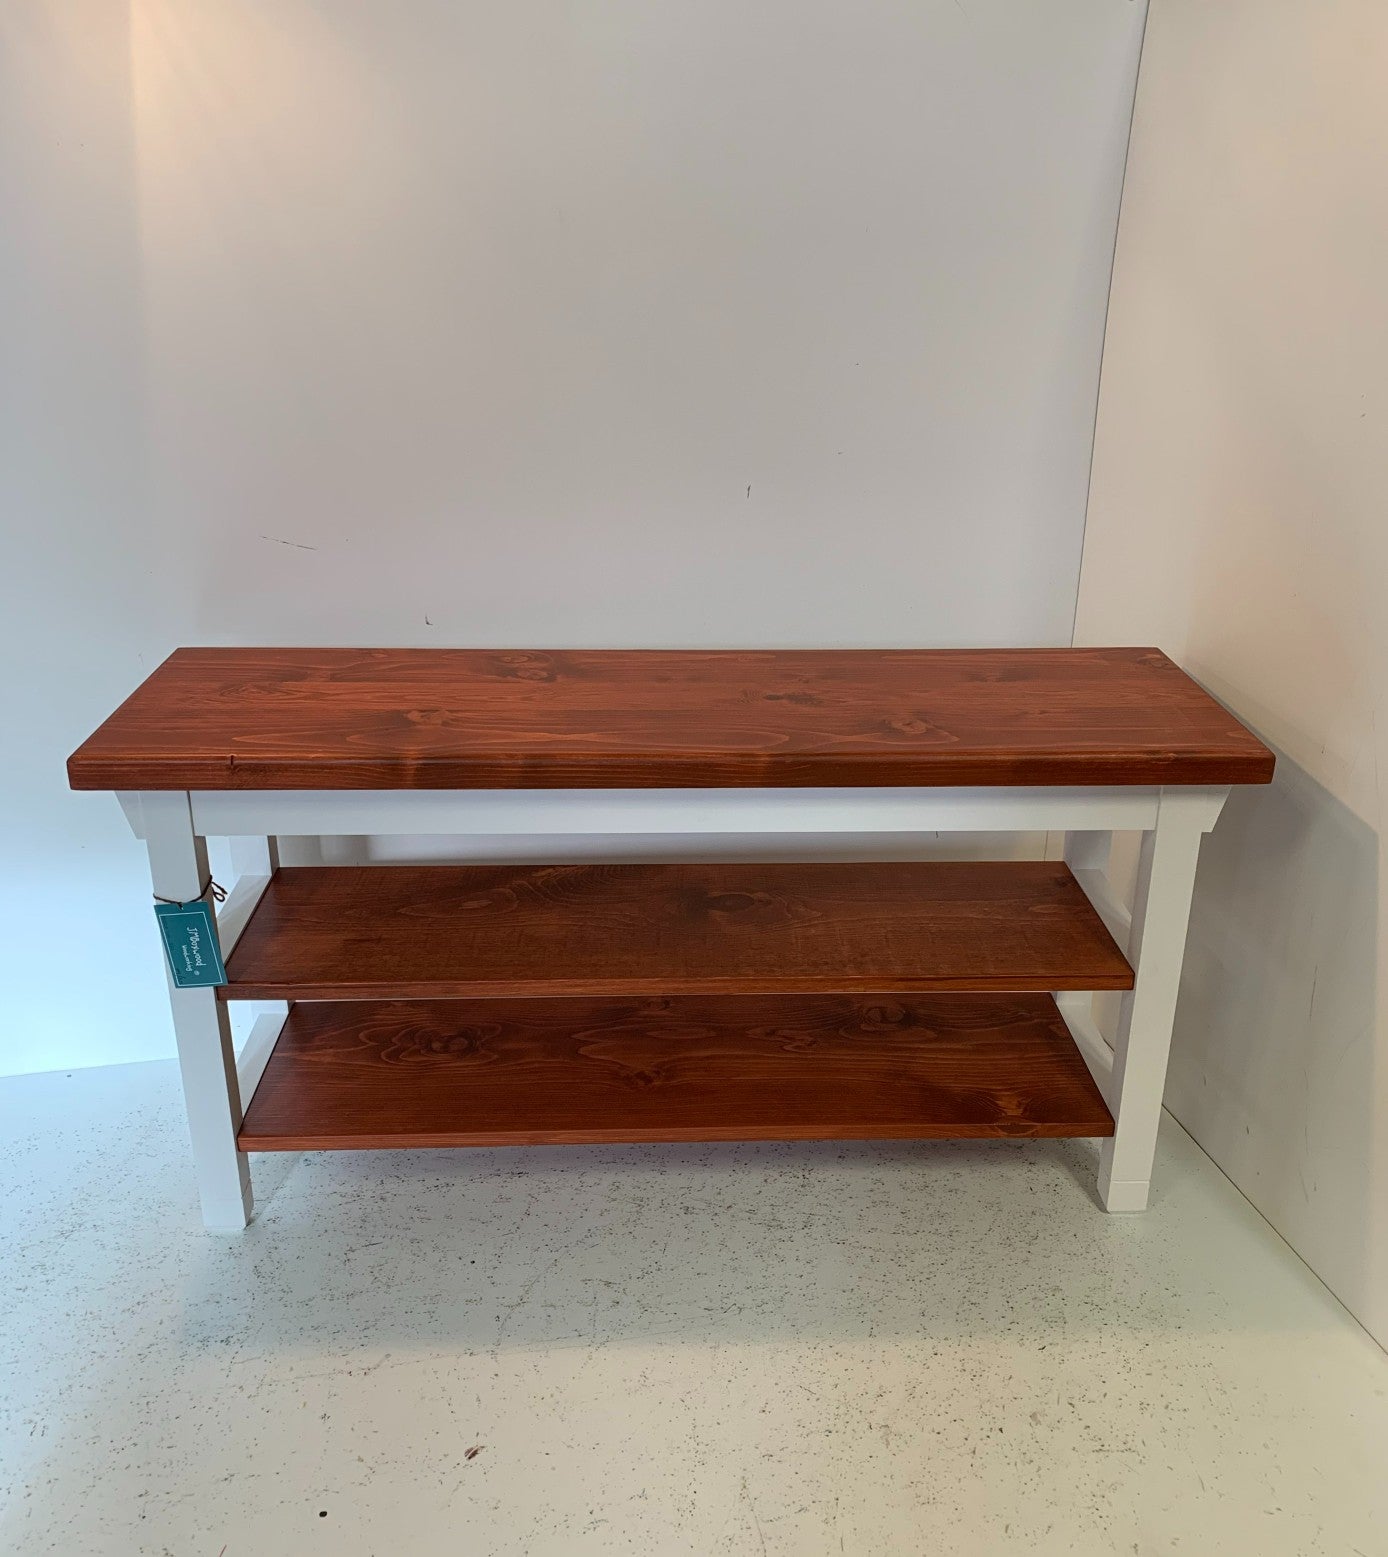 Two Shelf Bench with Stained Shelves